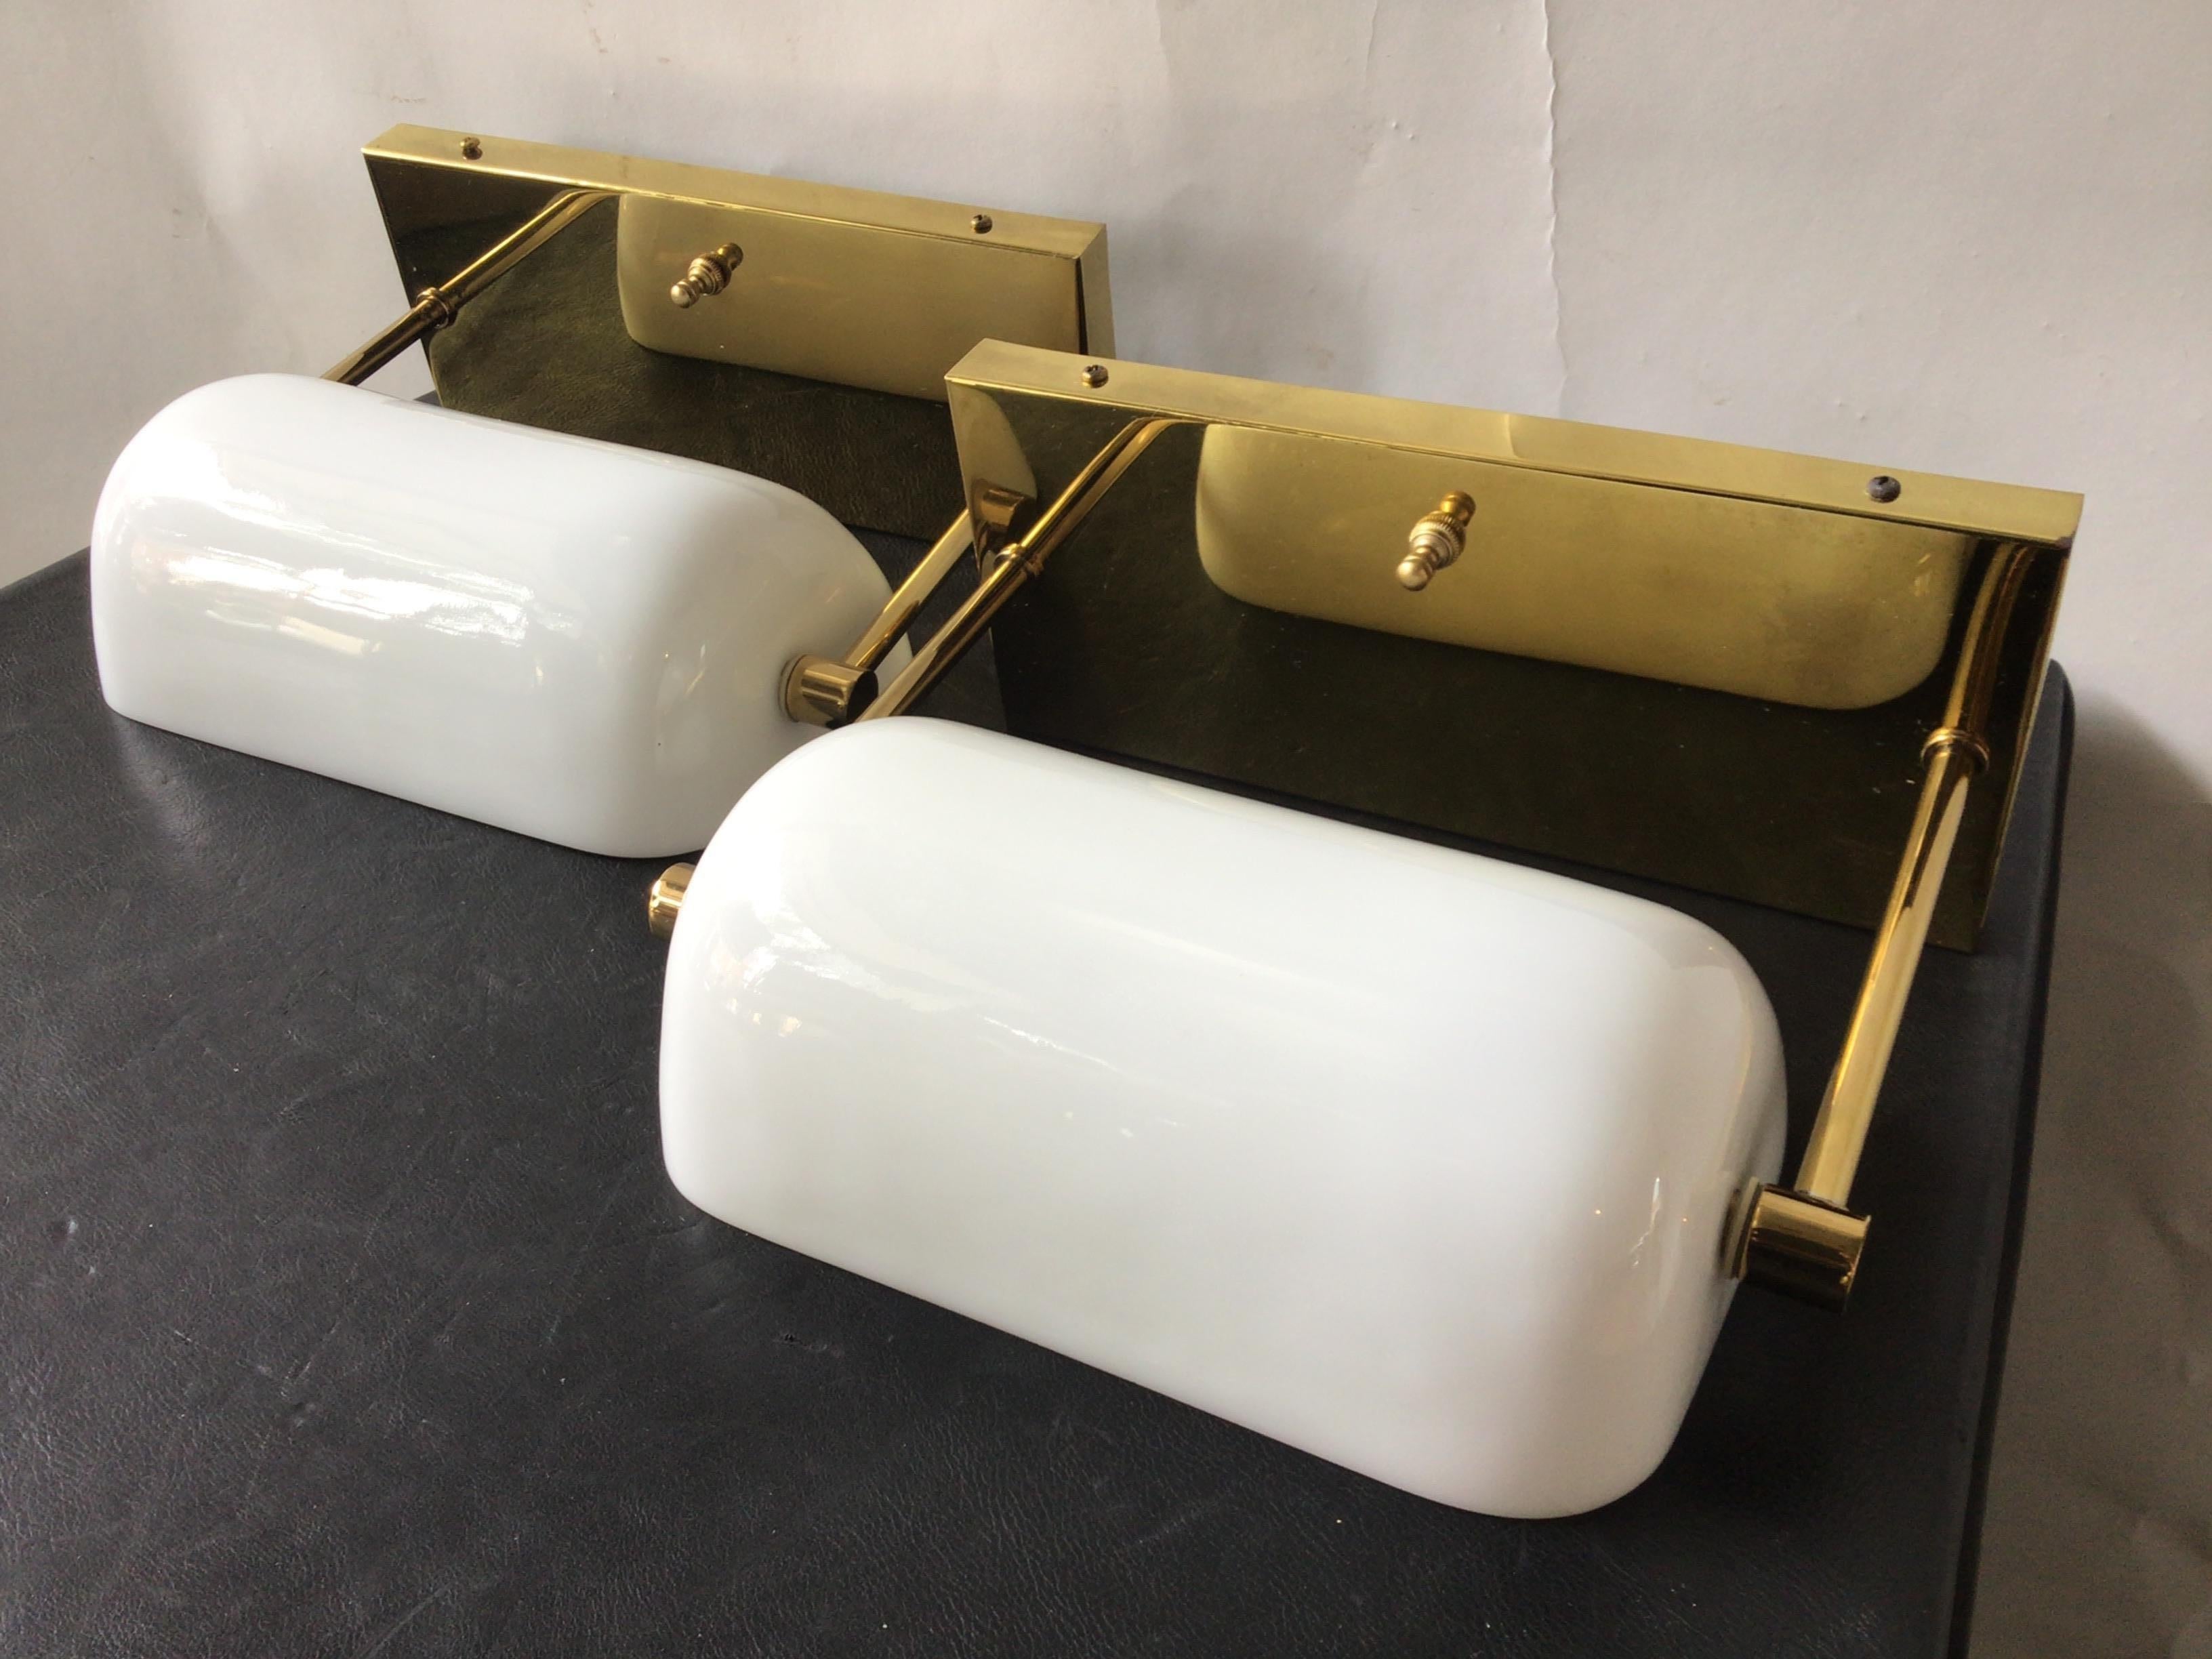 Pair of 1970s Brass and milk glass bankers lamp sconces by Nessen.
Only sold in a pair. The price for the pair is 1400. 
Must buy 2 sconces. 2 sconces are 700 each, equaling 1400.